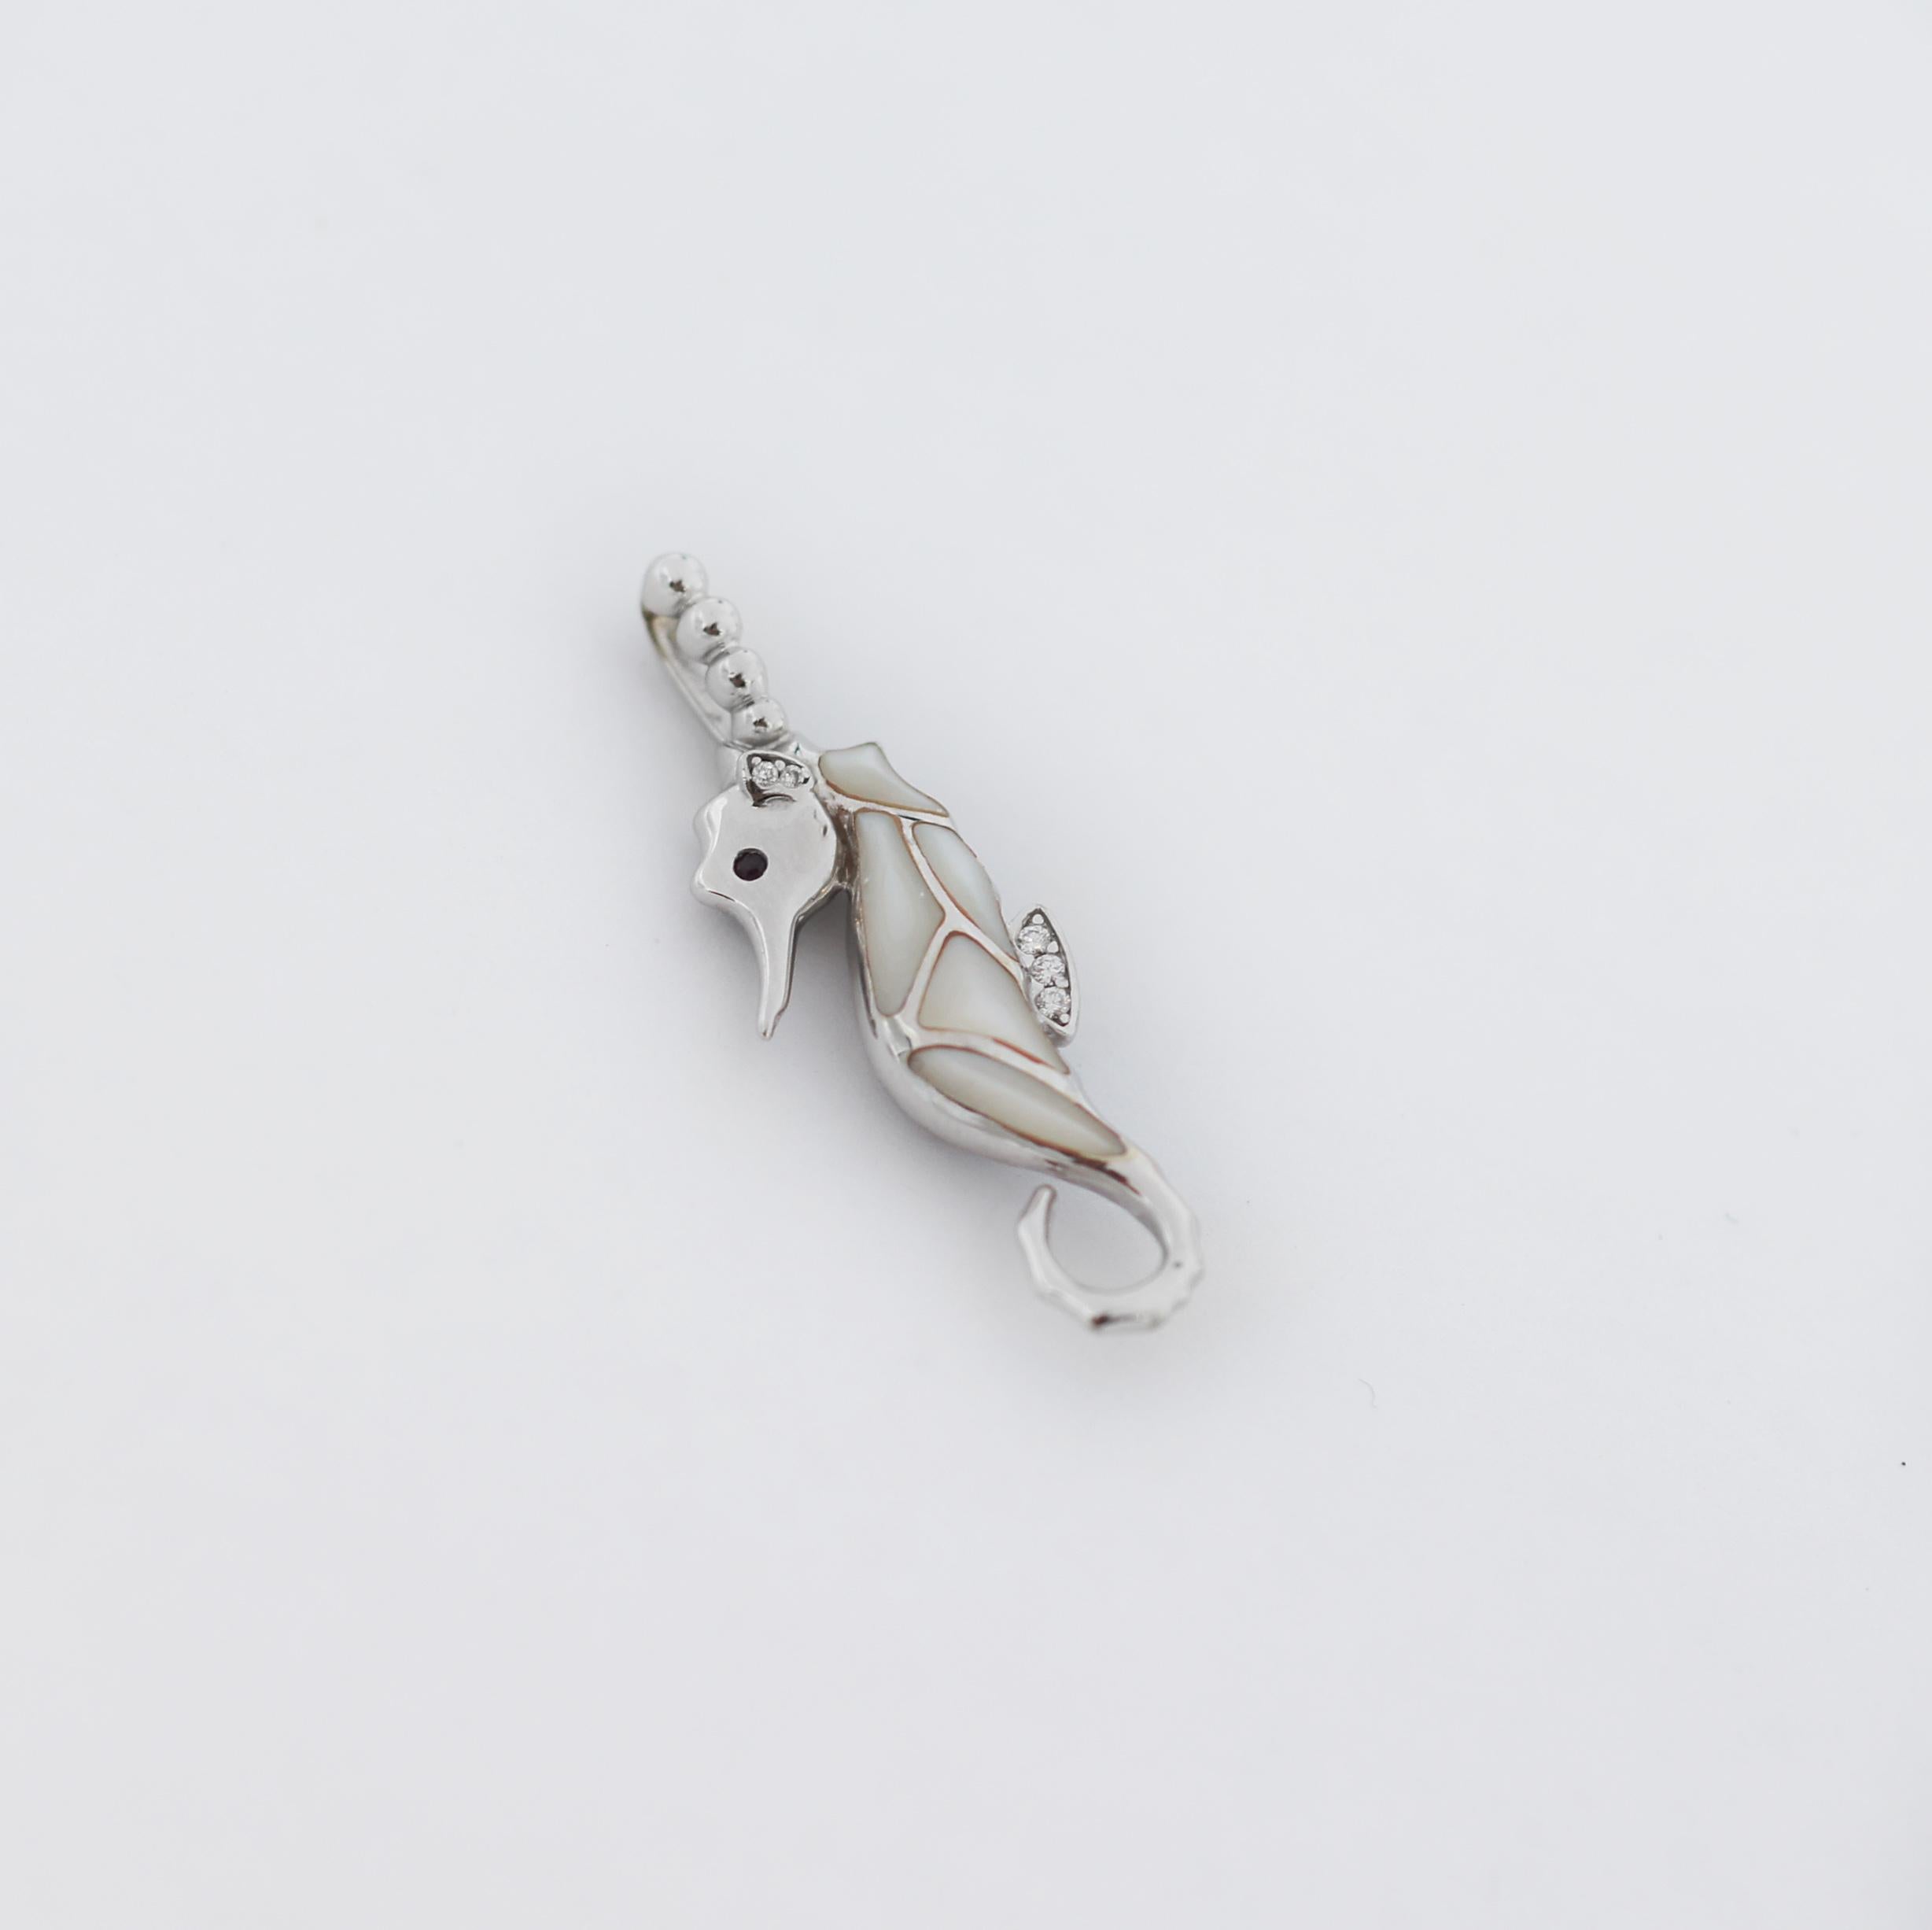 14K Gold
Kabana Seahorse Pendant
White Mother of Pearl Inlay
A Ruby eye
0.02 Carats (total weight) of Diamonds.
The pendant measures approximately 1 1/4